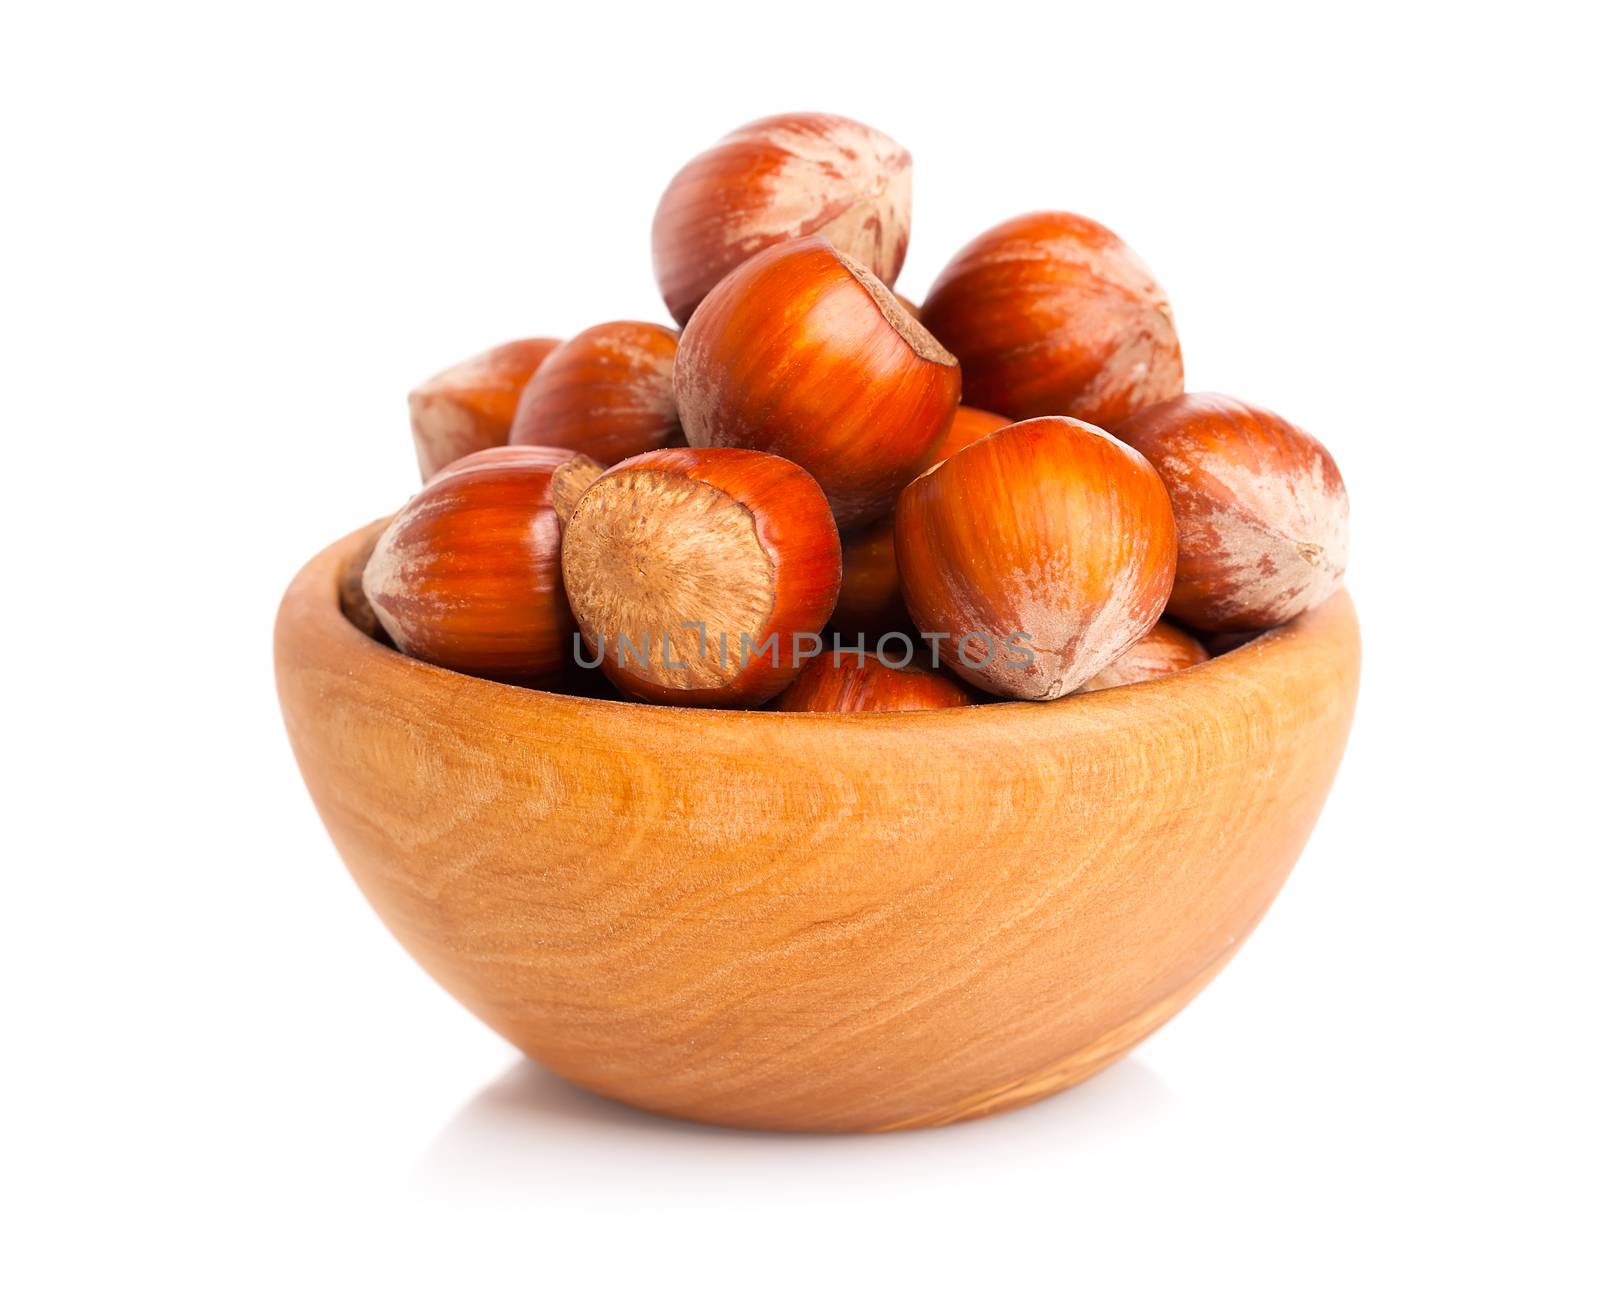 Hazelnuts in a wooden bowl on white background by motorolka